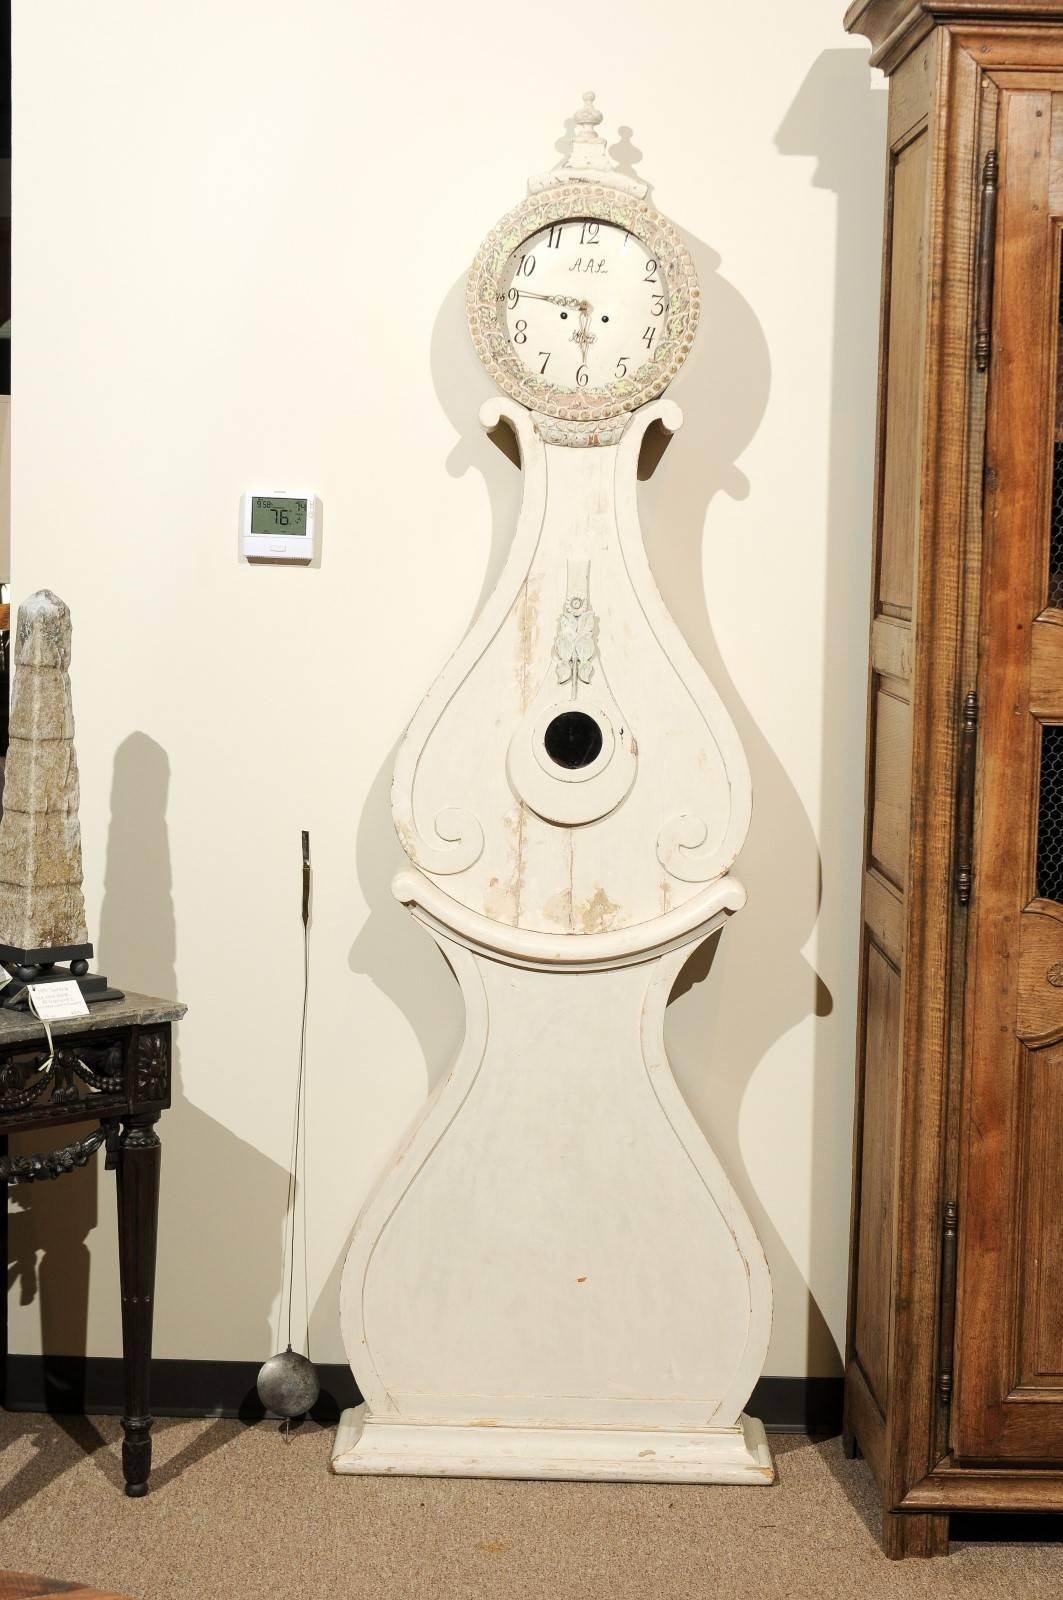 I love the size of this Swedish clock. It commands some room. The clock has the Classic Swedish painted finish of white wash and very simple lines. The designer must have been imaginative because he carved a small sunflower in the middle of the